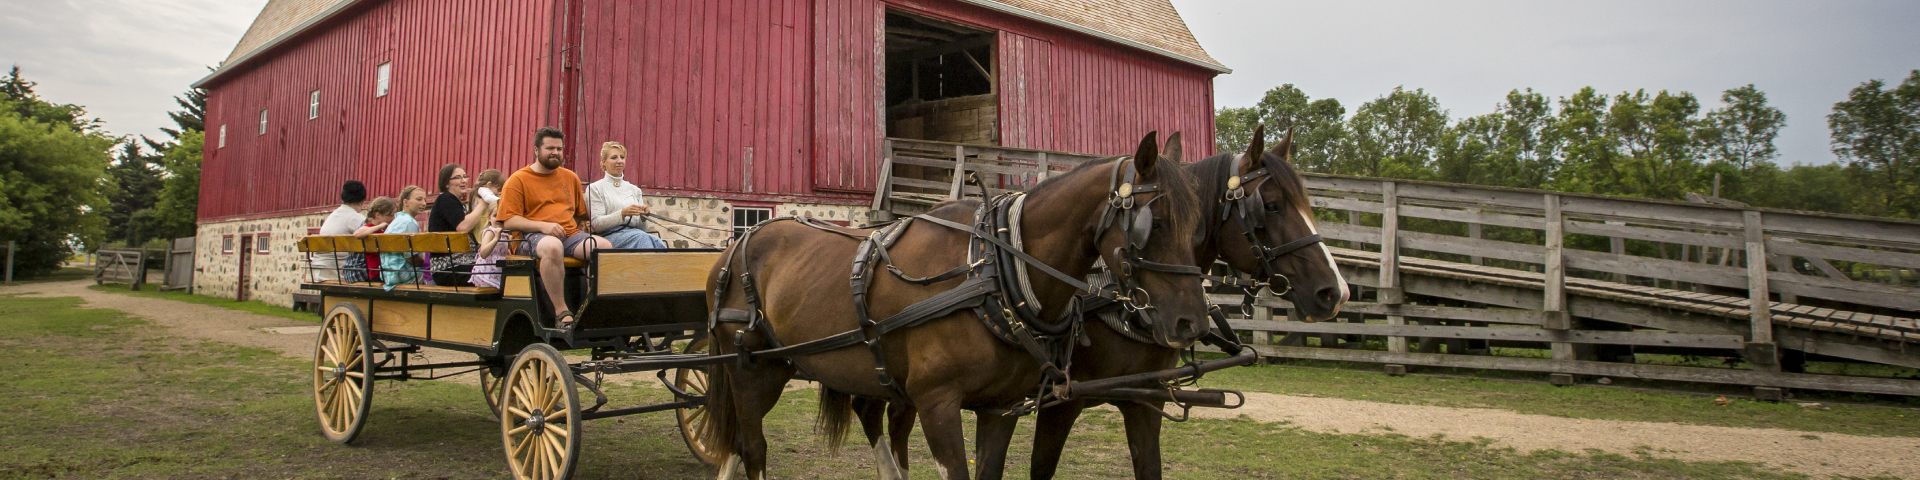 A team of horses pulls a wagon full of visitors past the big red barn at Motherwell Homestead National Historic Site.